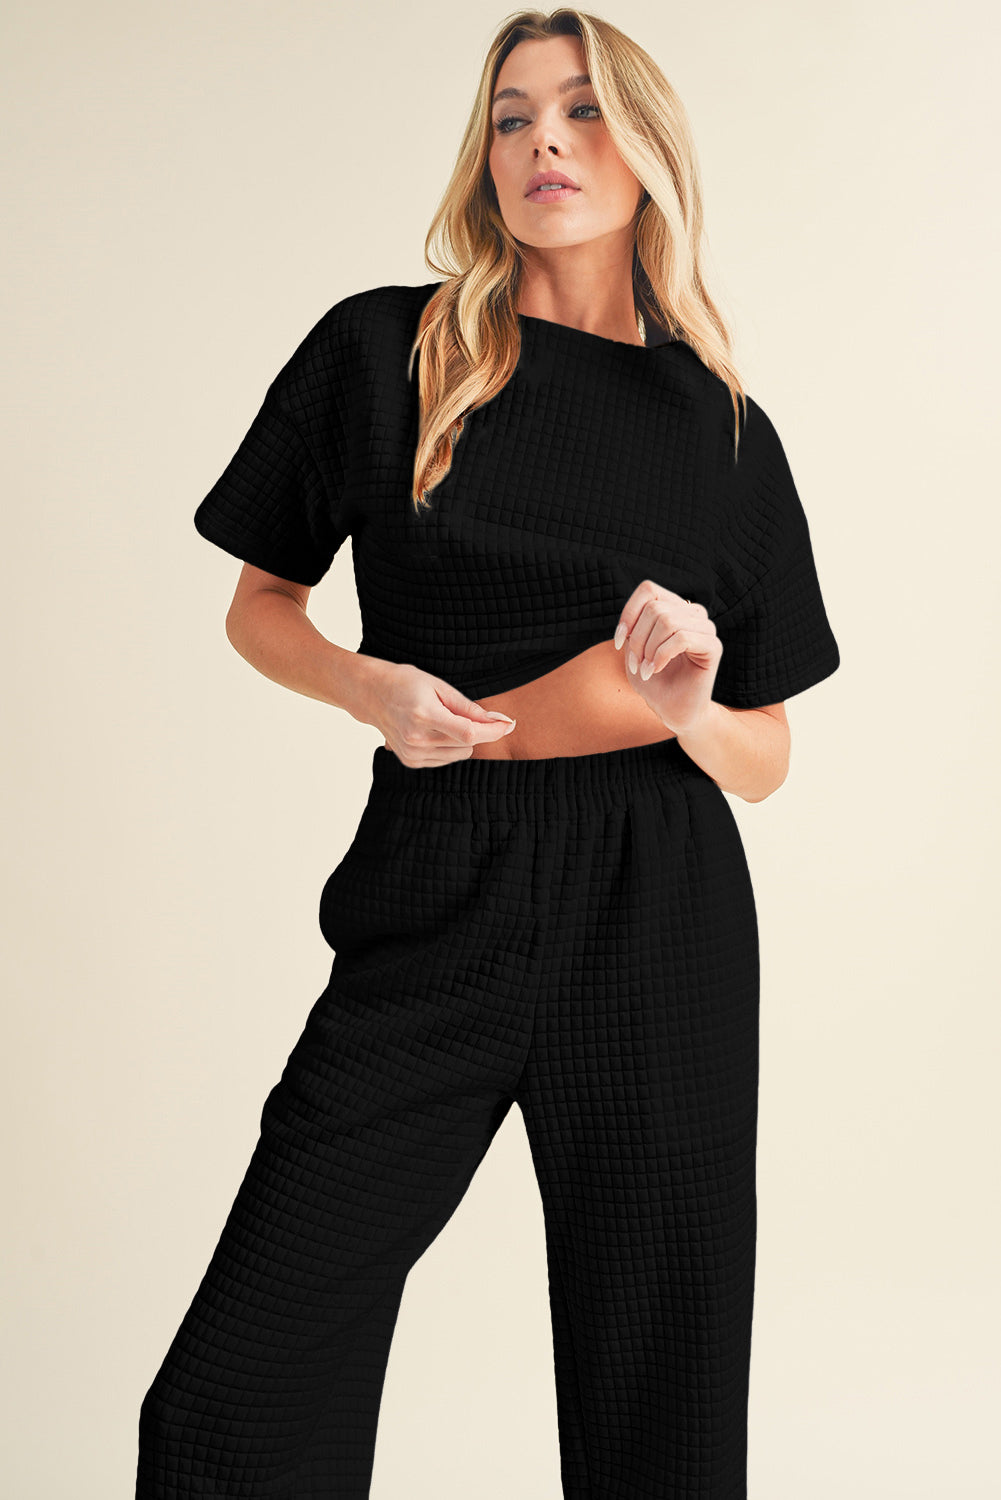 Black Textured Cropped Tee and Jogger Pants Set